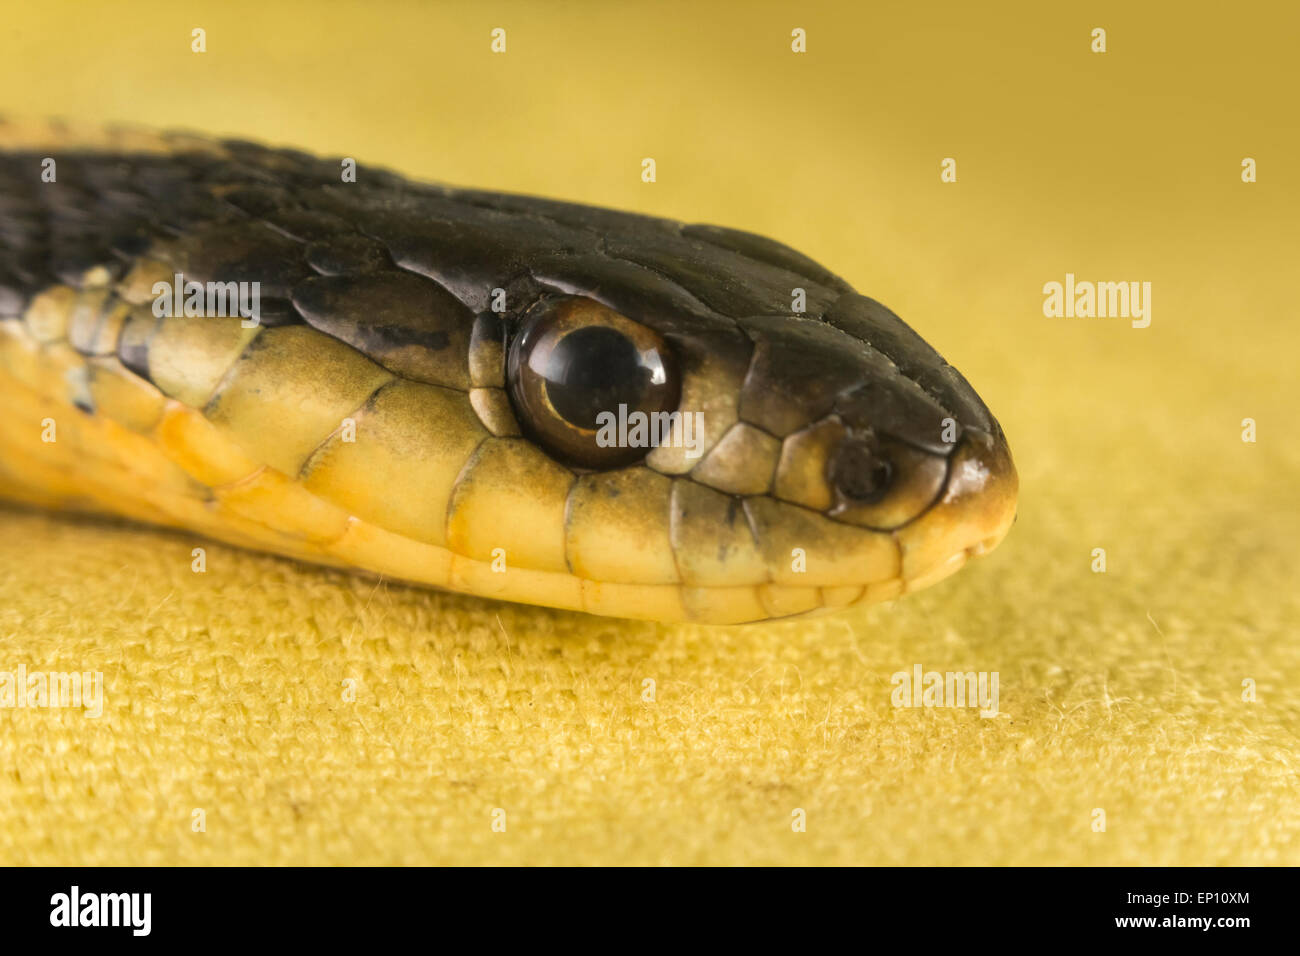 Orientale Slithering garter snake noto anche come Thamnophis sirtalis sirtalis Foto Stock